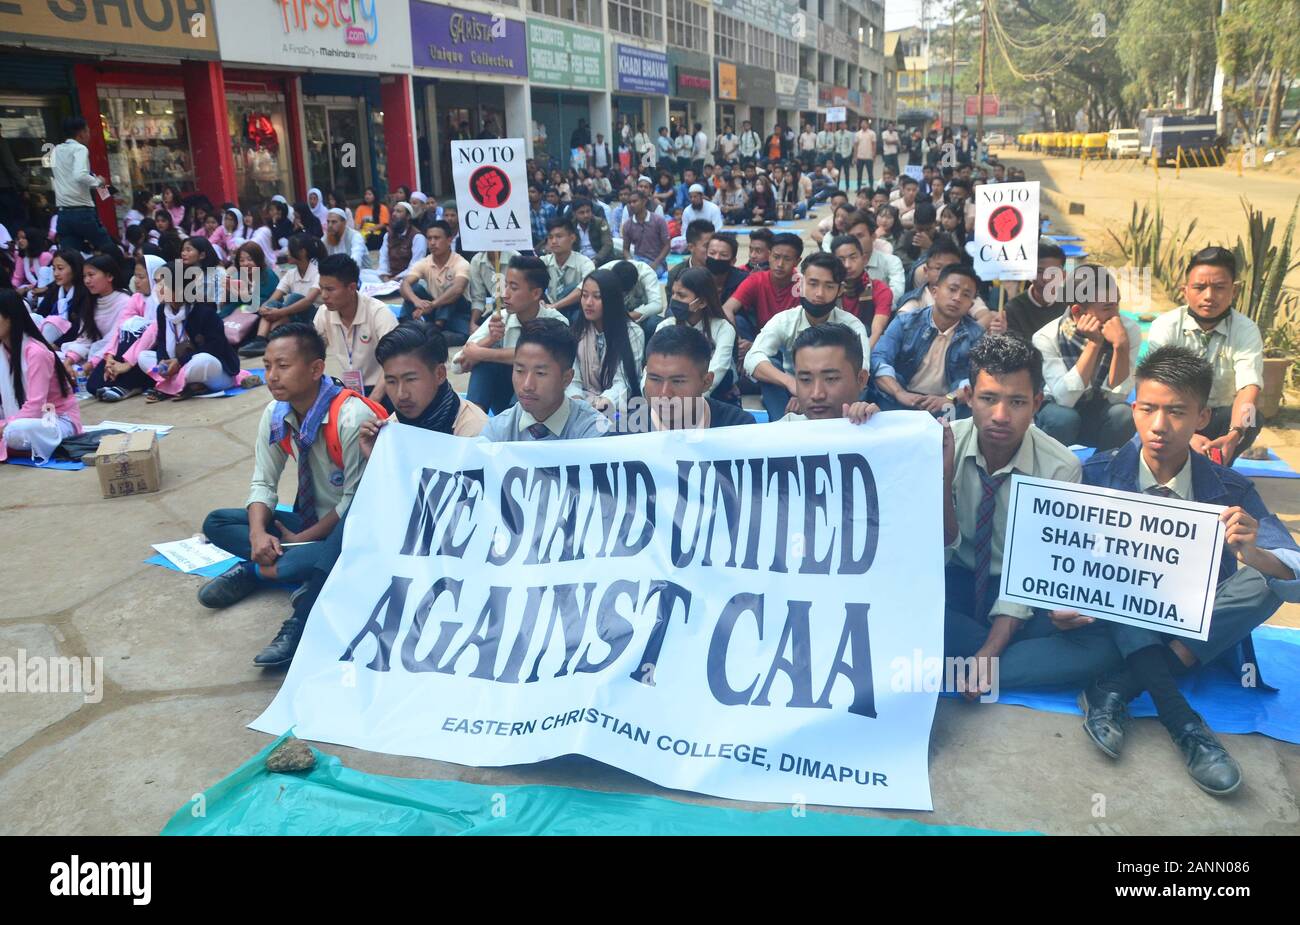 Dimapur, India. 18th Jan 2020: Student’s hold placards and Banner during a protest against Citizenship Amendment Act 2019 (CAA) in Dimapur, India north eastern state of Nagaland. Credit: Caisii Ma/Alamy Live News Stock Photo